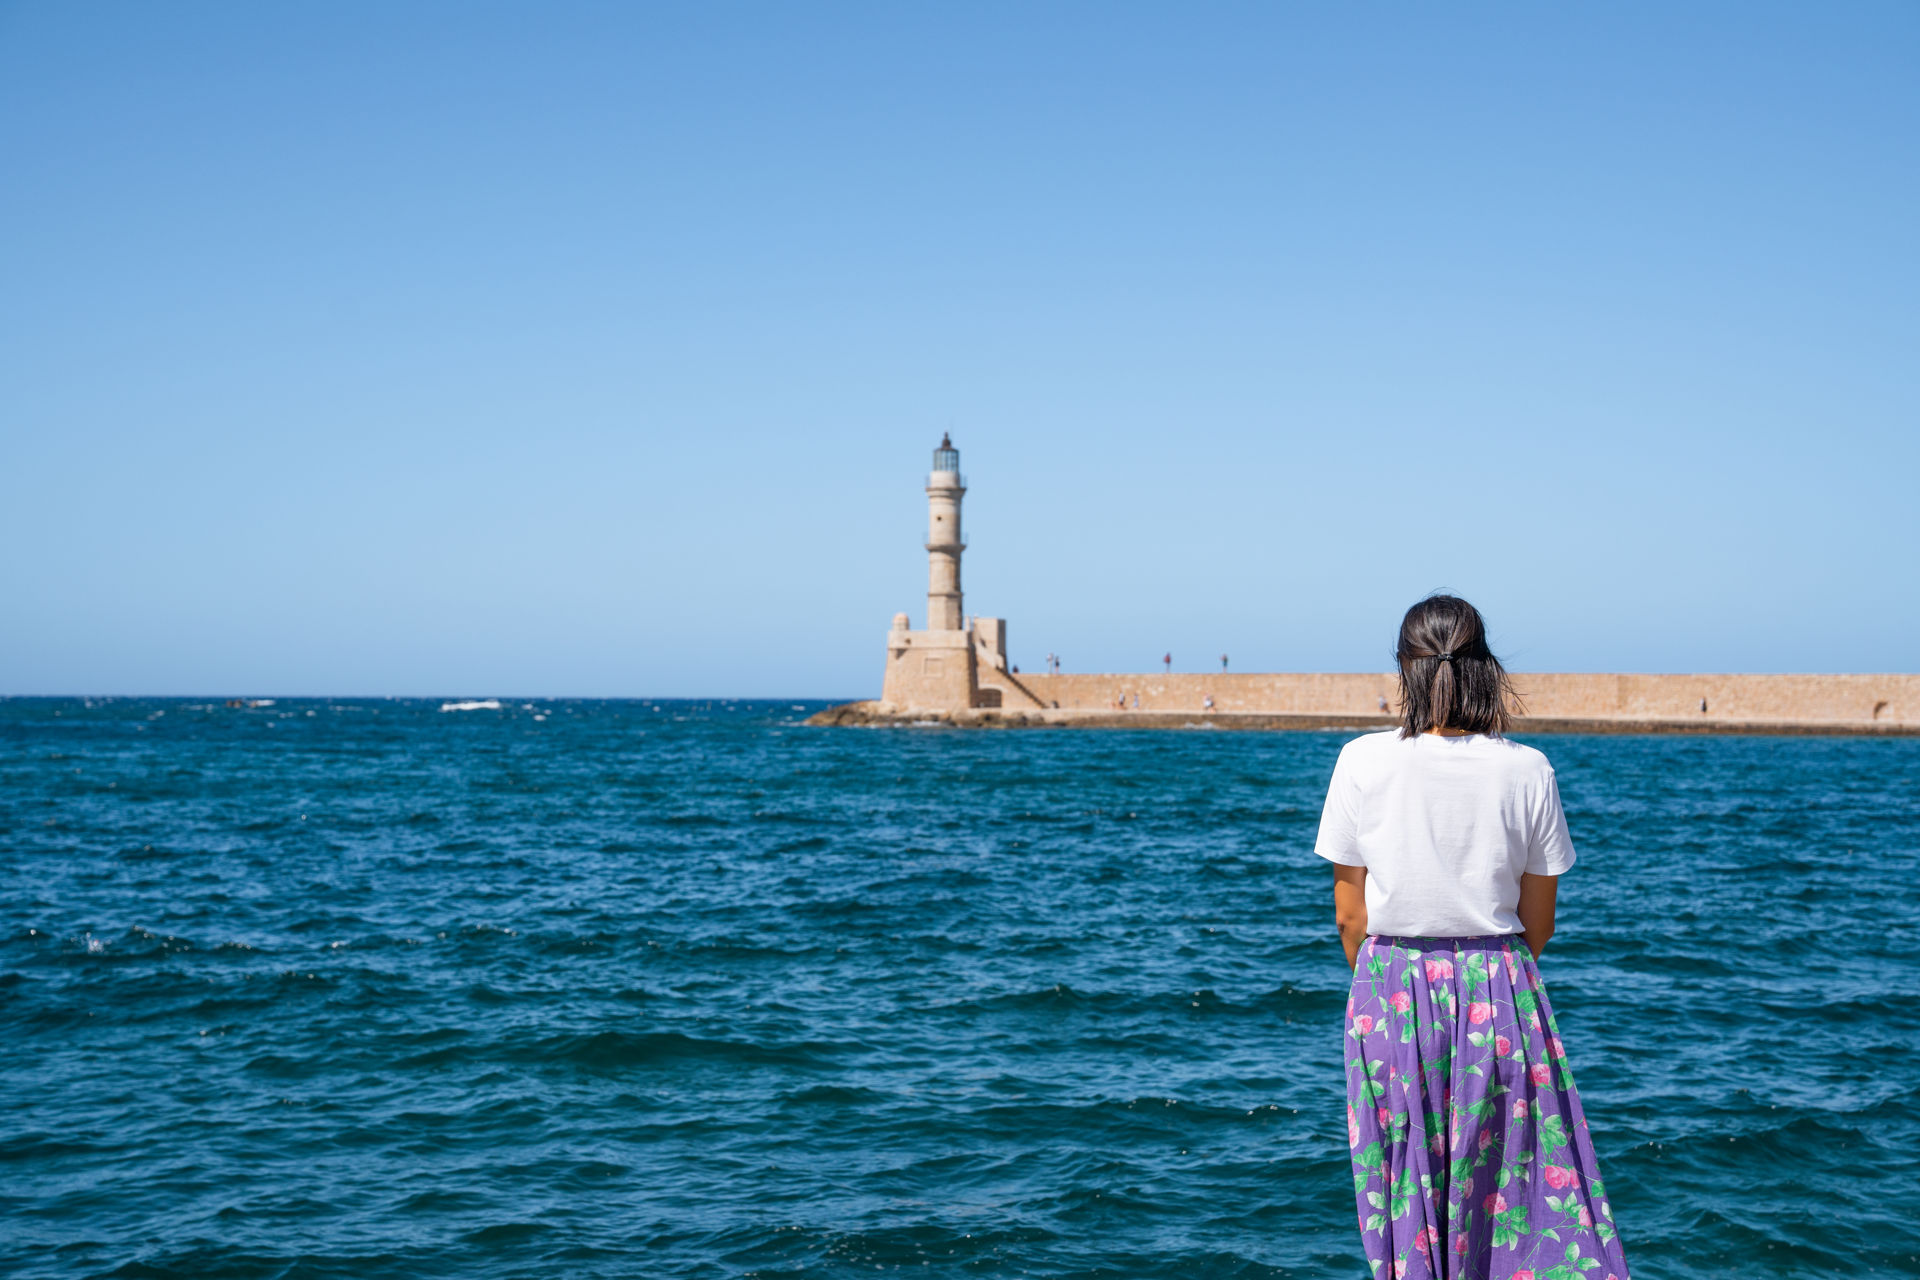 Chania’s famous lighthouse (originally built by the Venetians but reconstructed by the Egyptians in the 19th century)